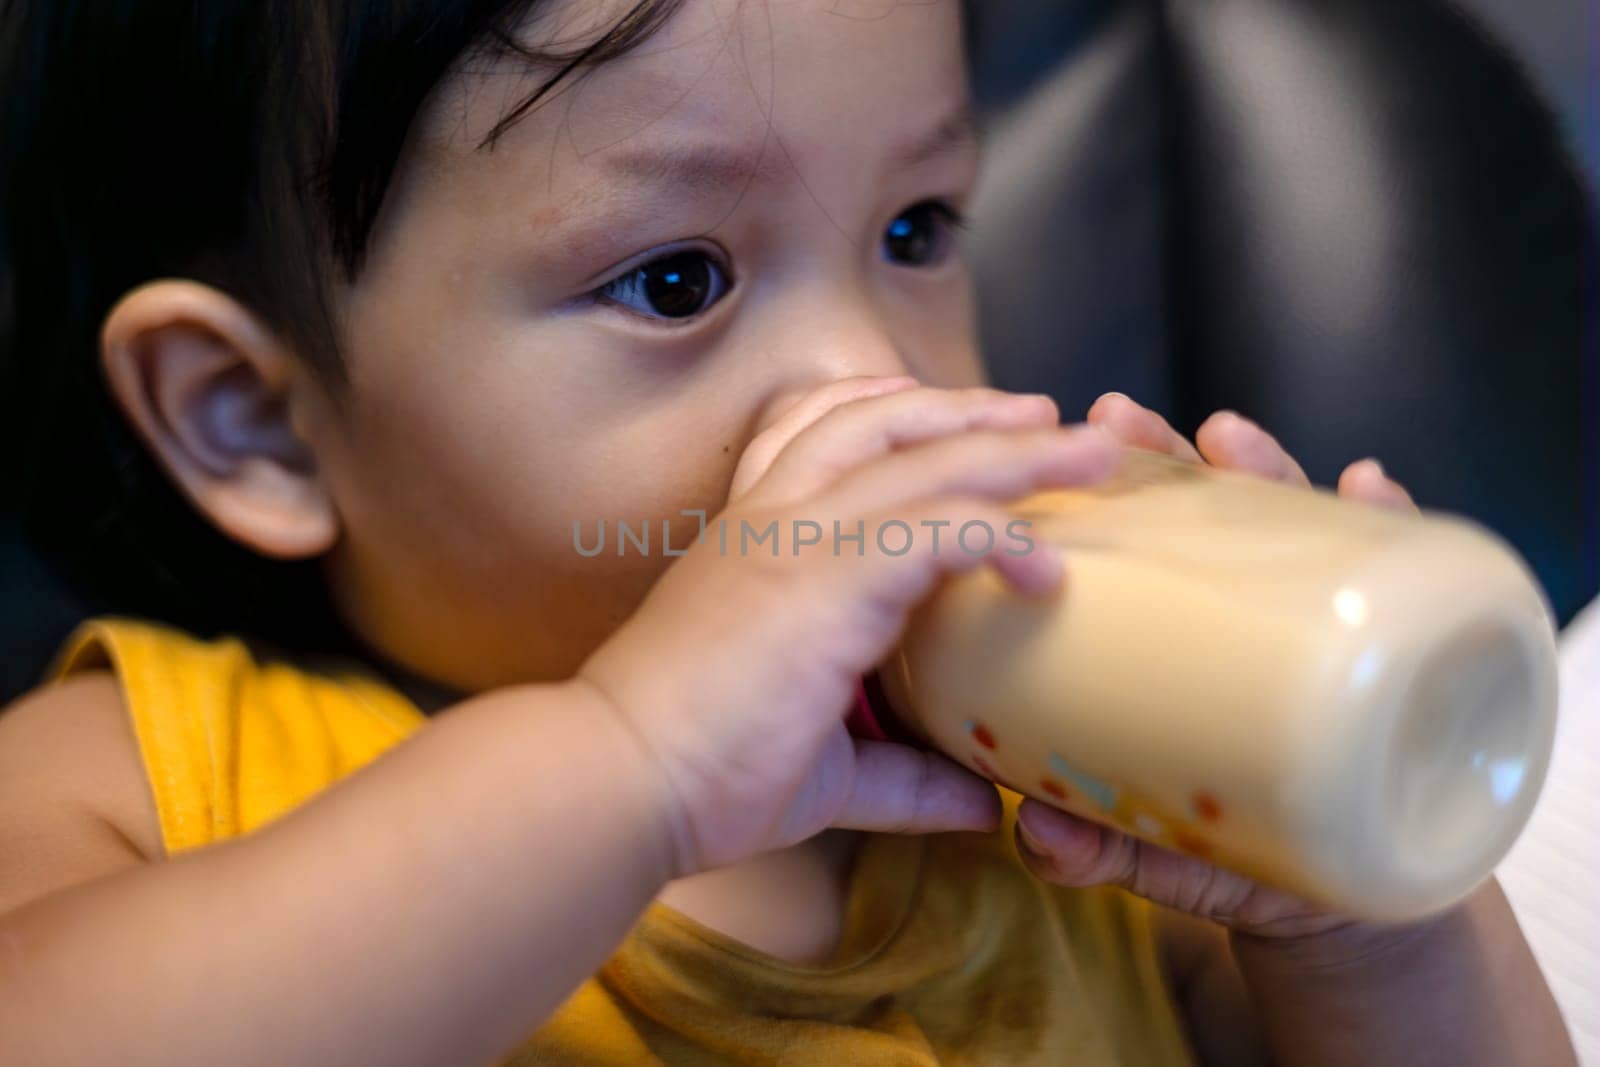 Adorable baby boy  drinking milk from a bottle. Formula drink for infant.